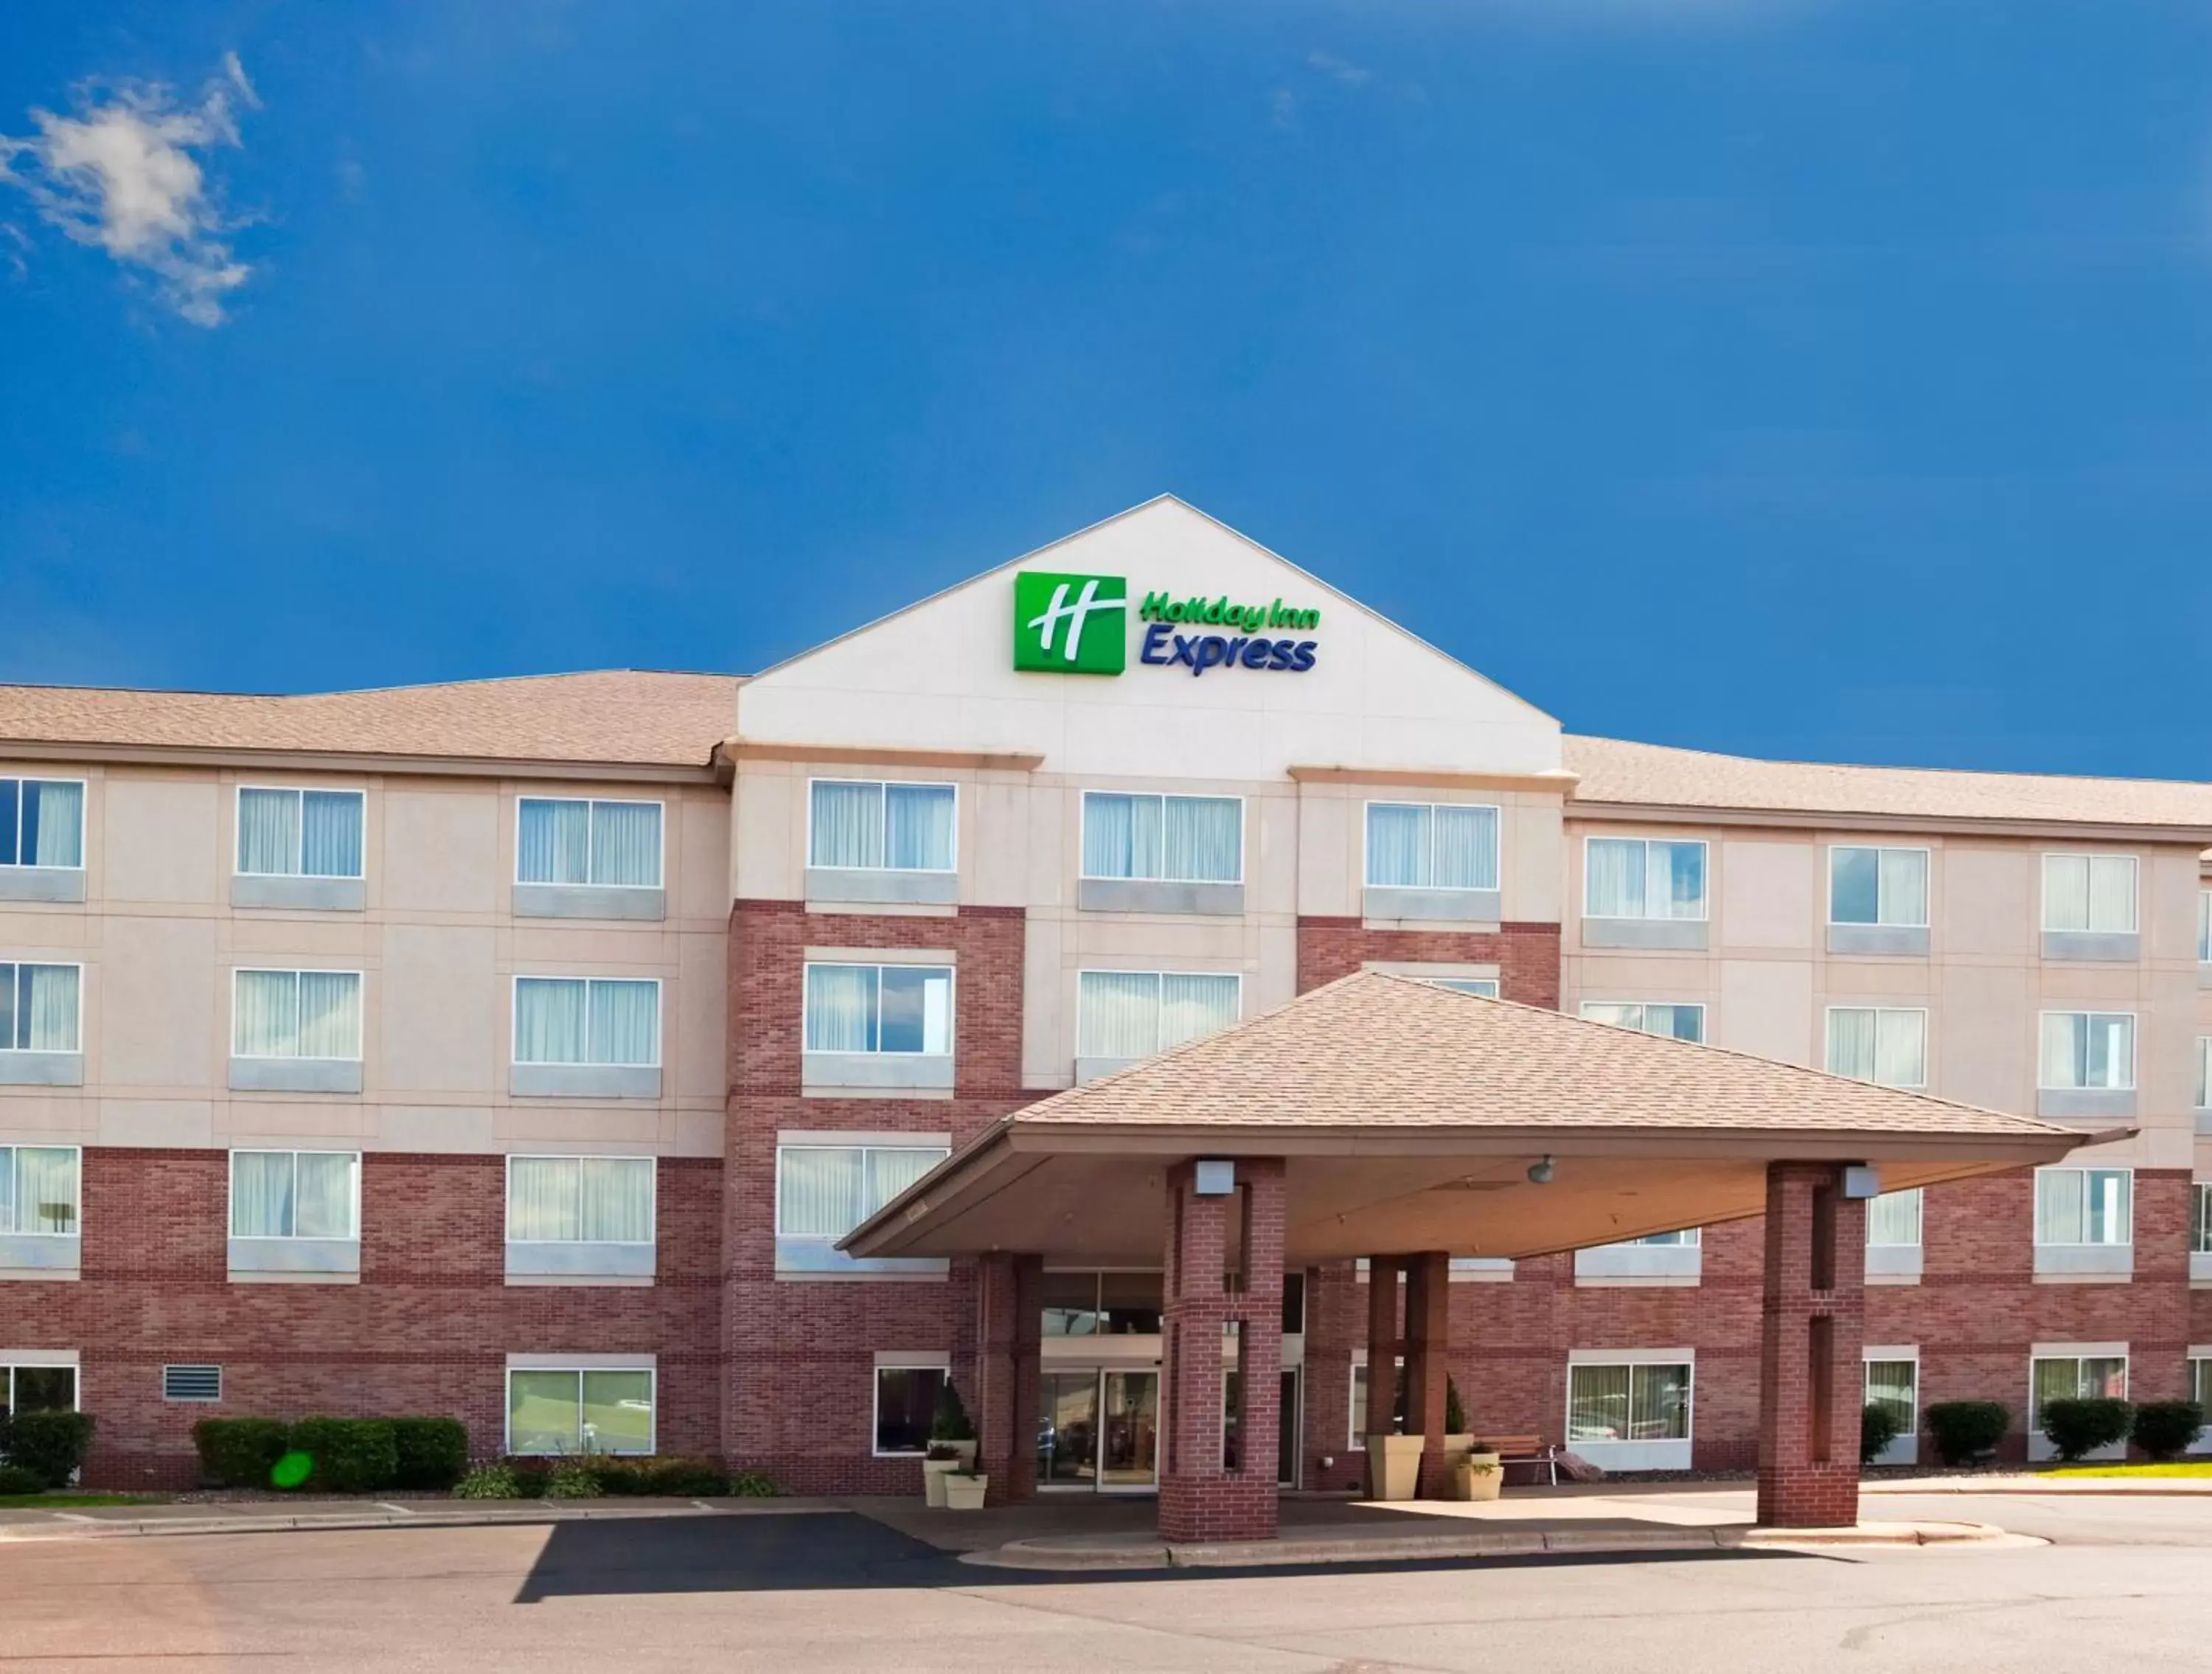 Property Building in Holiday Inn Express St Croix Valley, an IHG Hotel